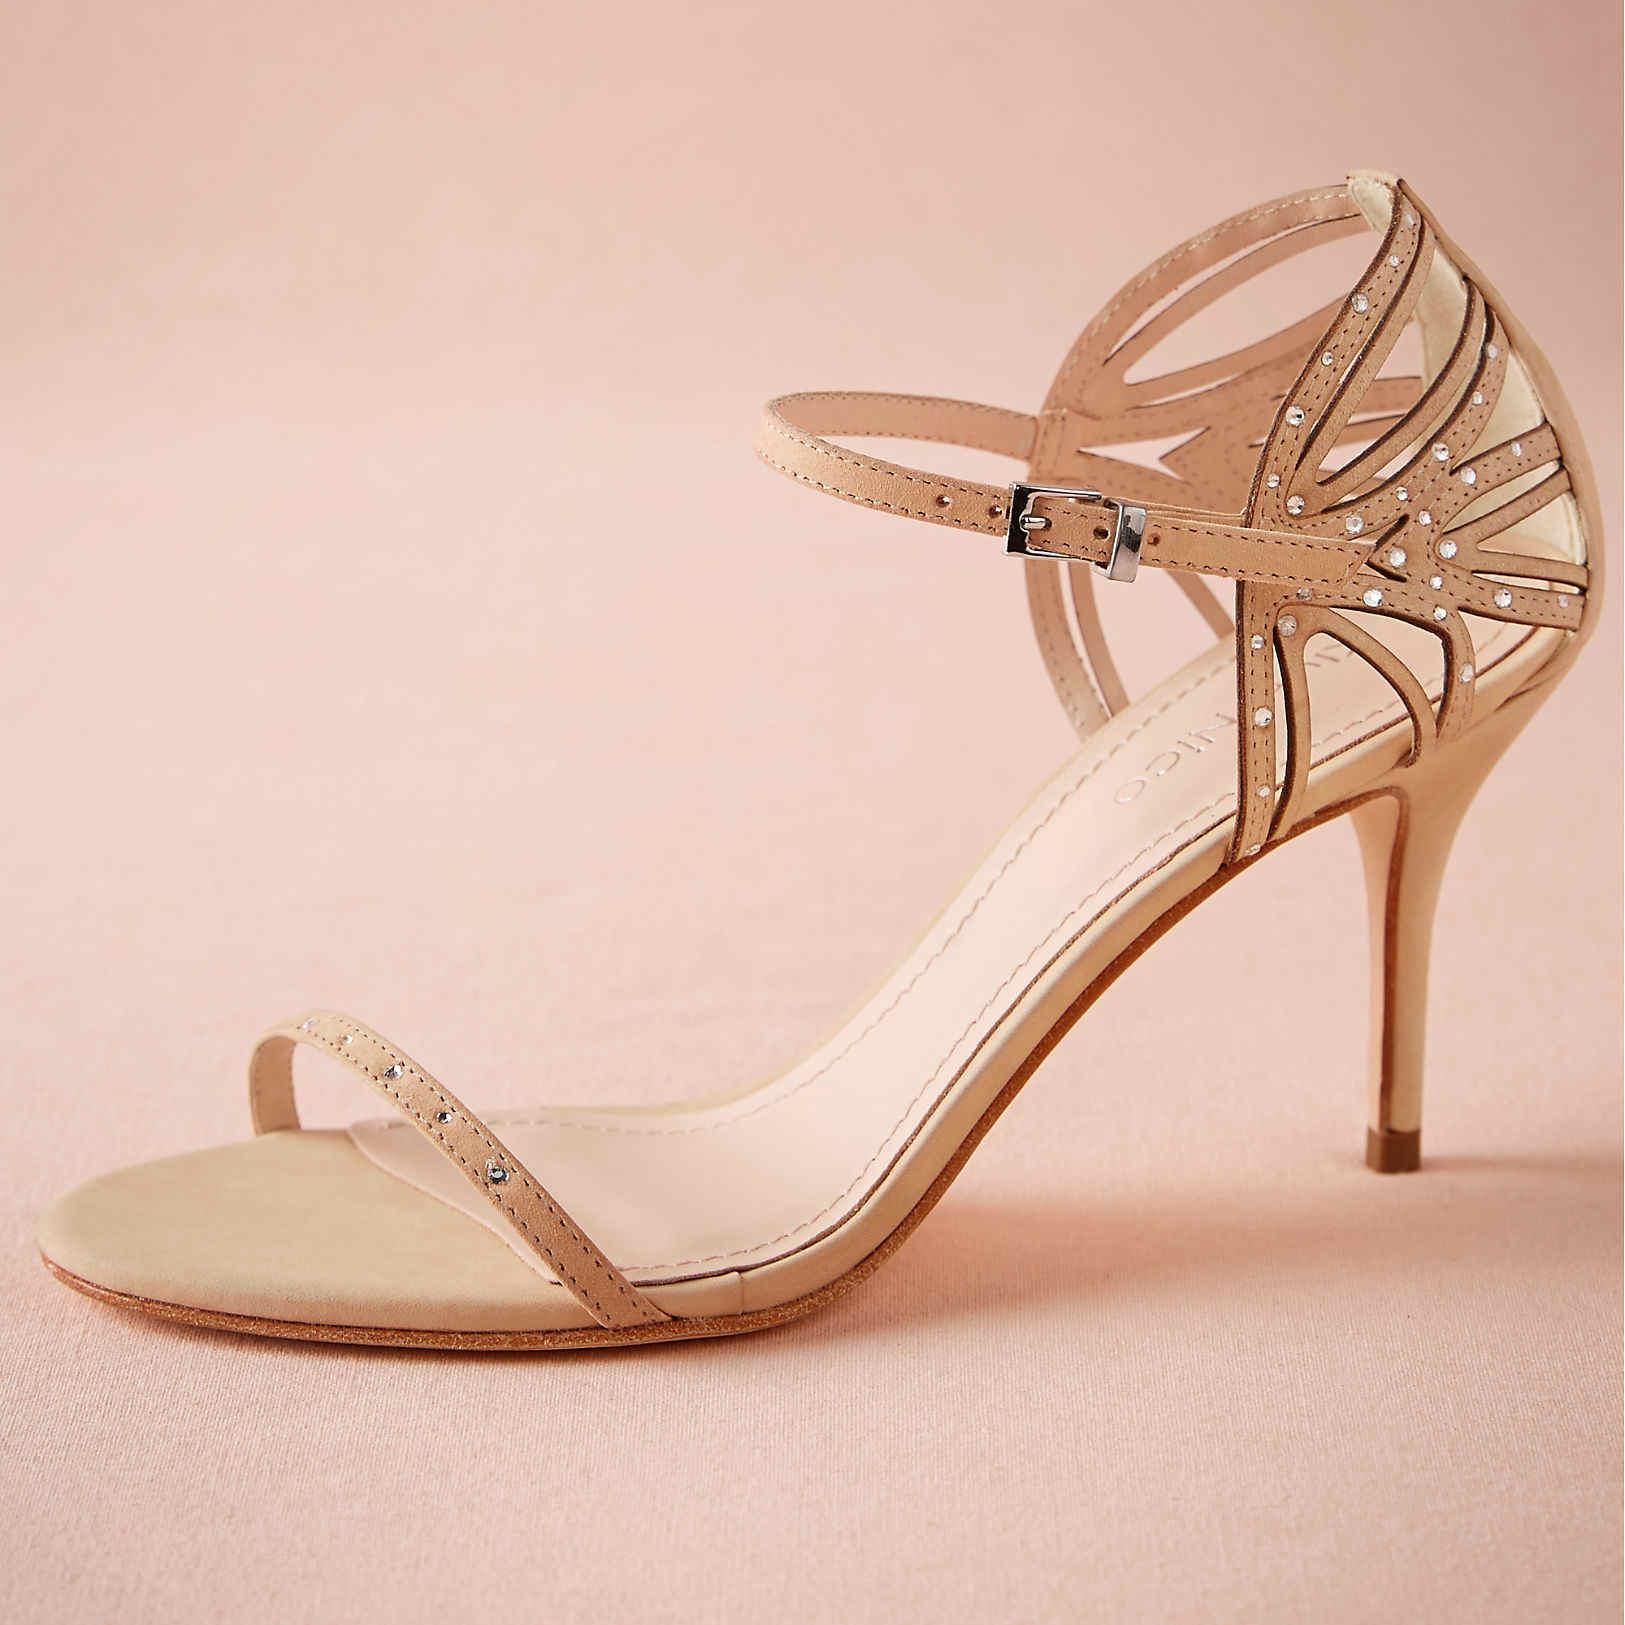 Wedding/Evening Pink Shoes With Bows | Blush wedding shoes 